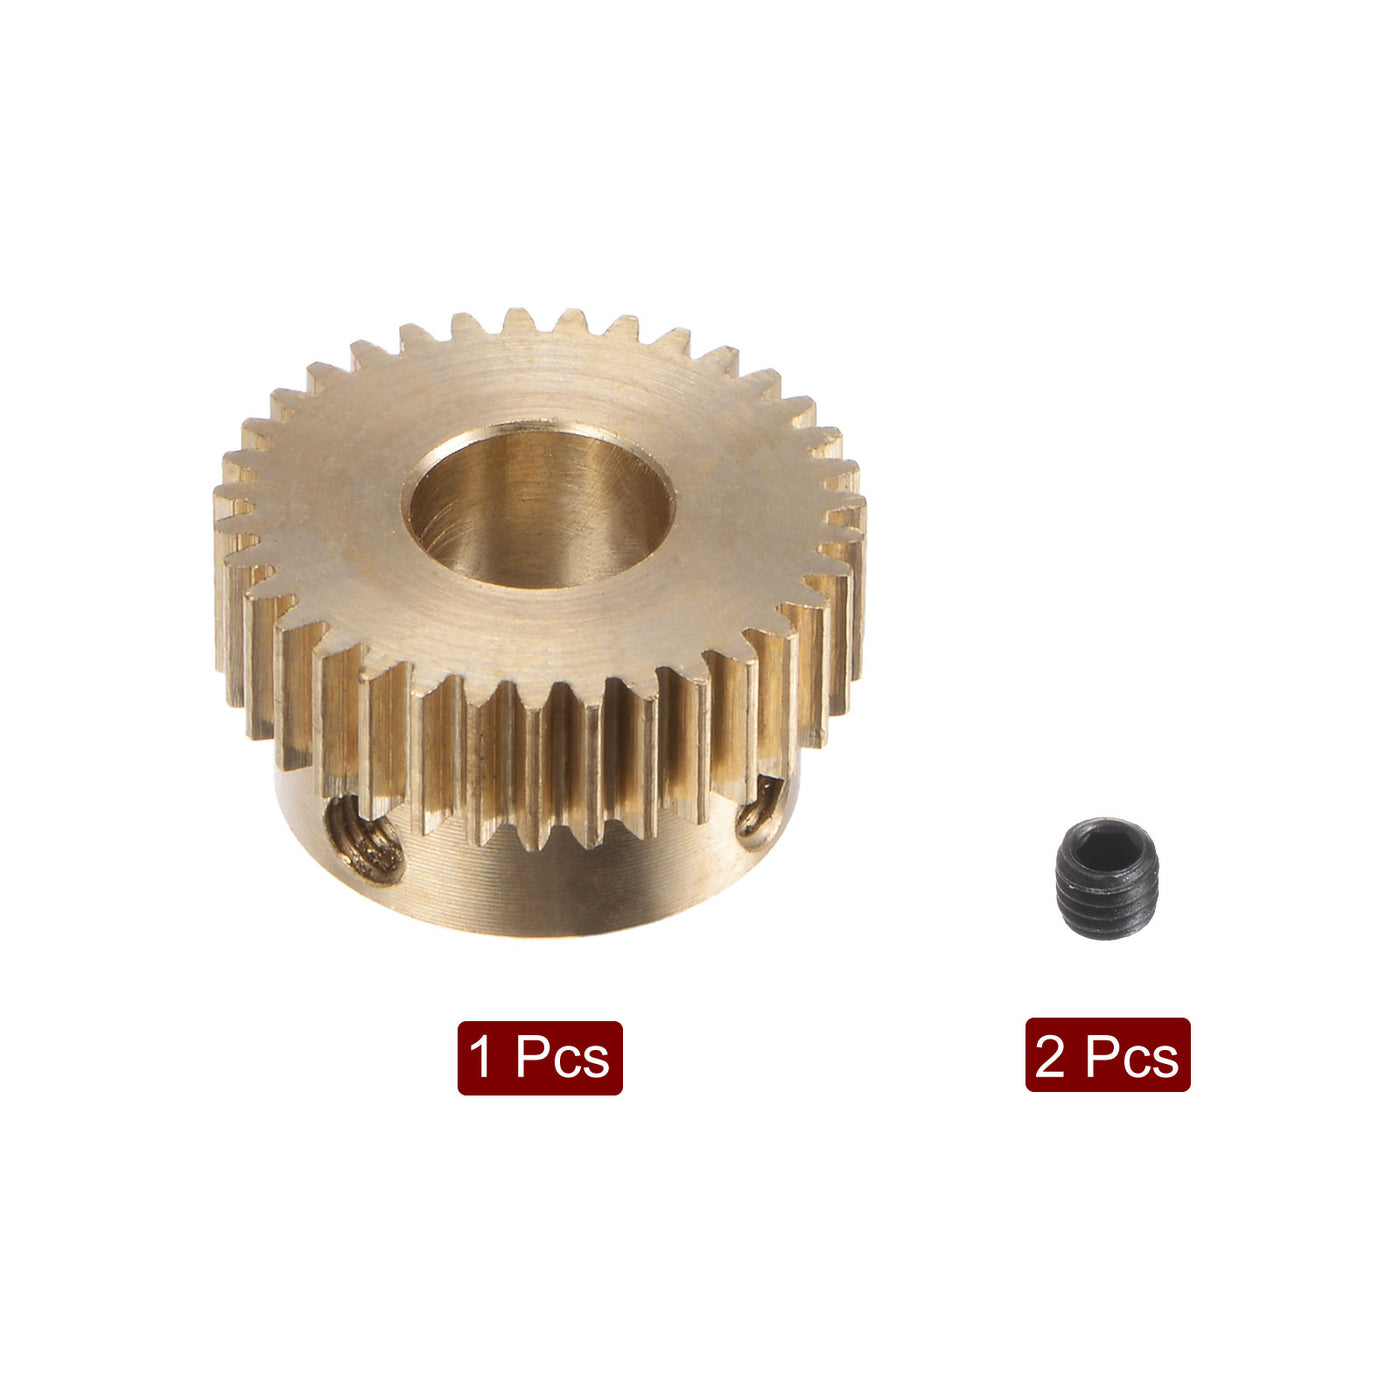 uxcell Uxcell 0.5 Mod 35T 7mm Bore 18mm Outer Dia Brass Motor Rack Pinion Gear with Screws